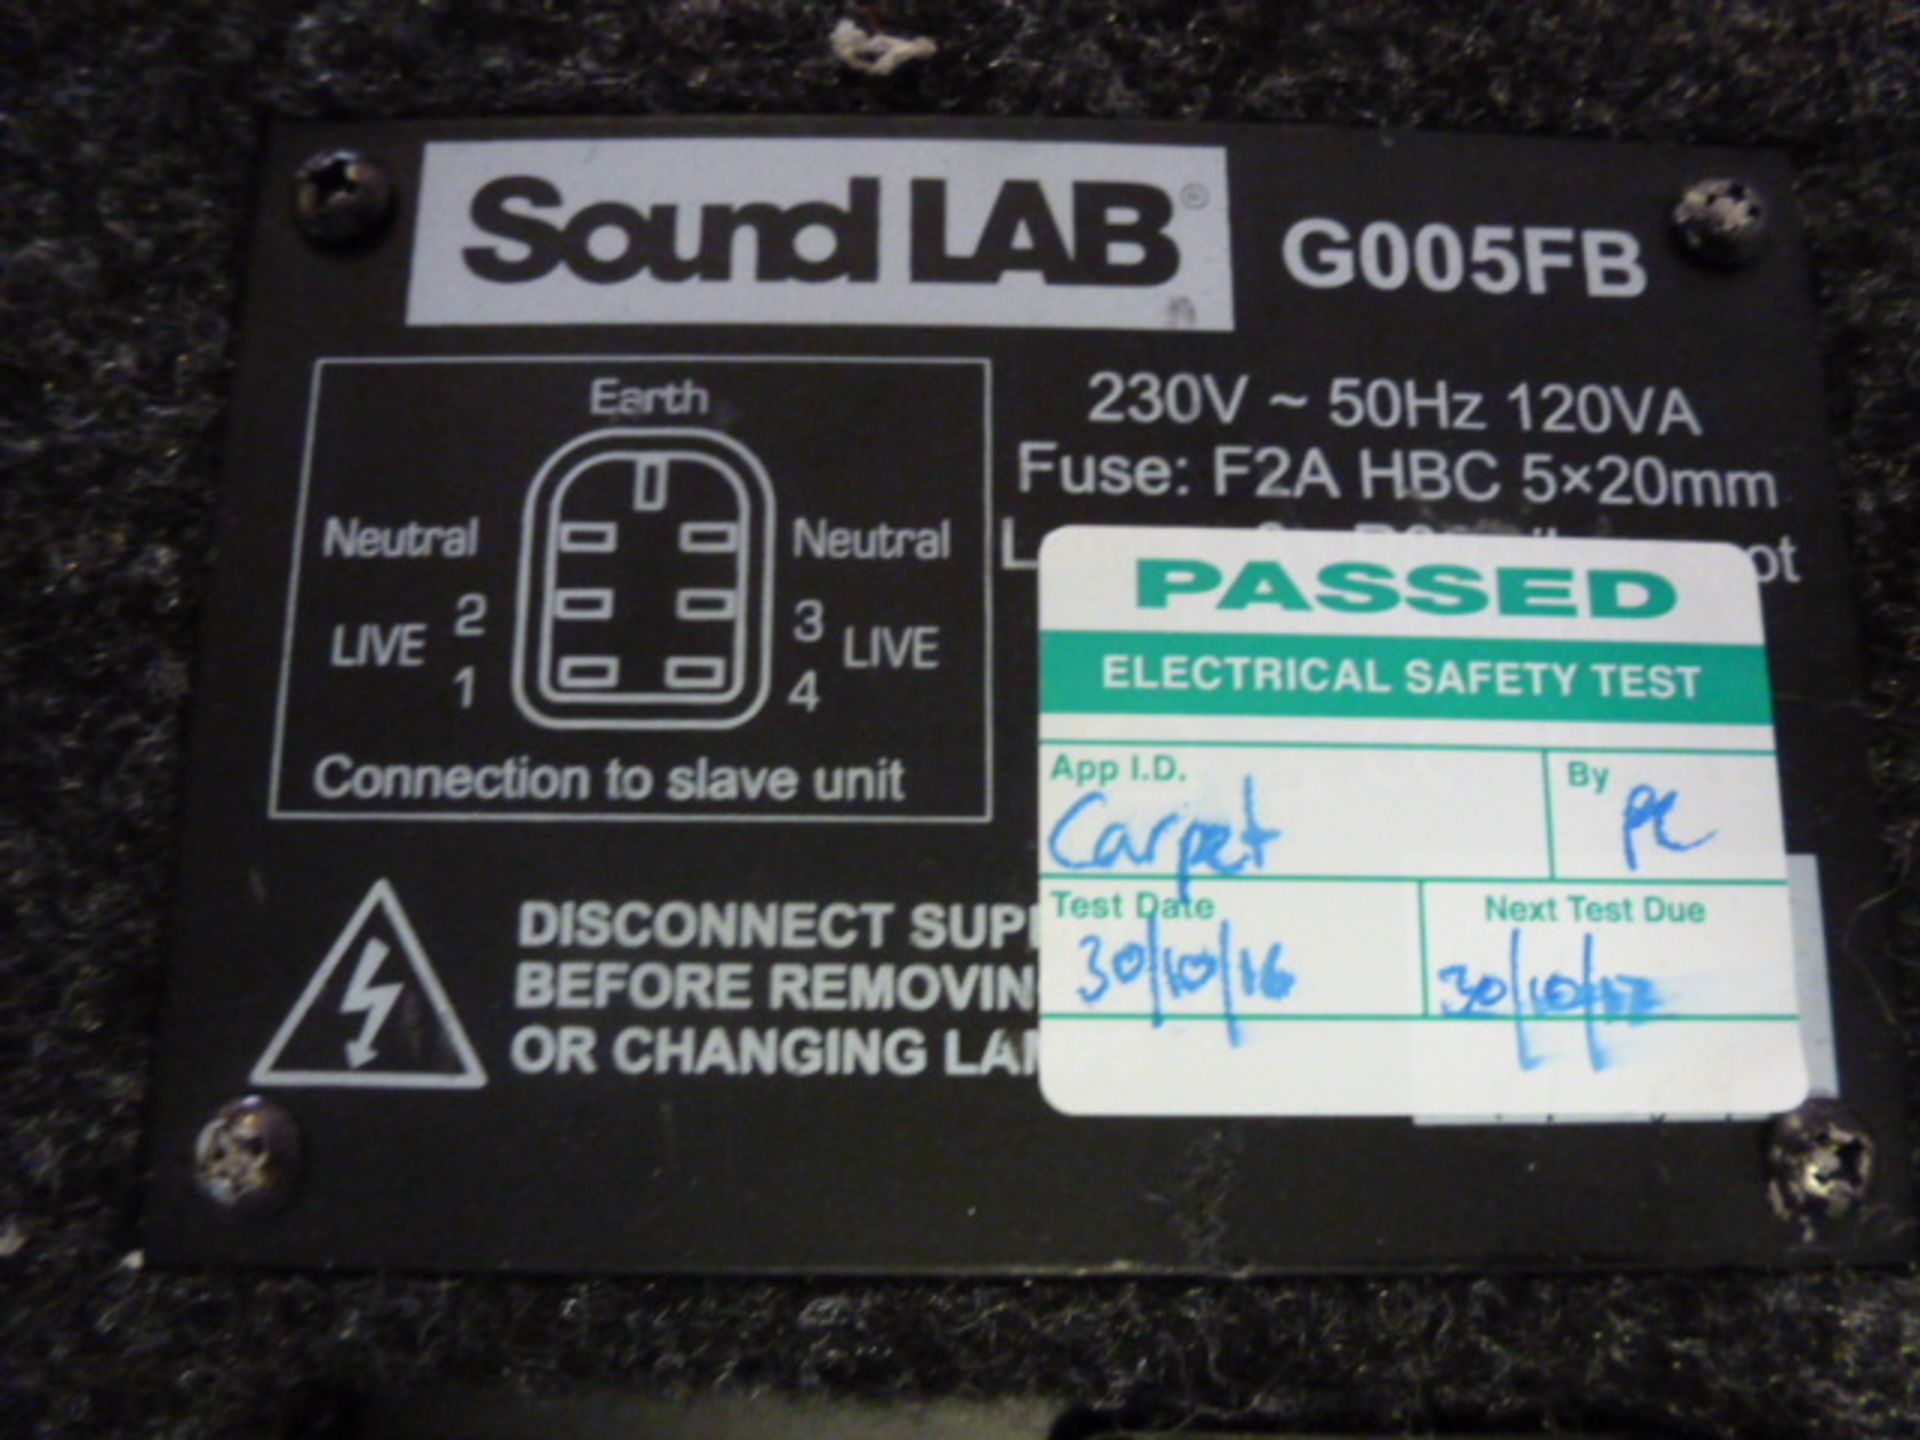 Sound LAB 8 Lamp Light Box with Sound to Light Function, Model G005FB, with Power Supply. - Image 6 of 6